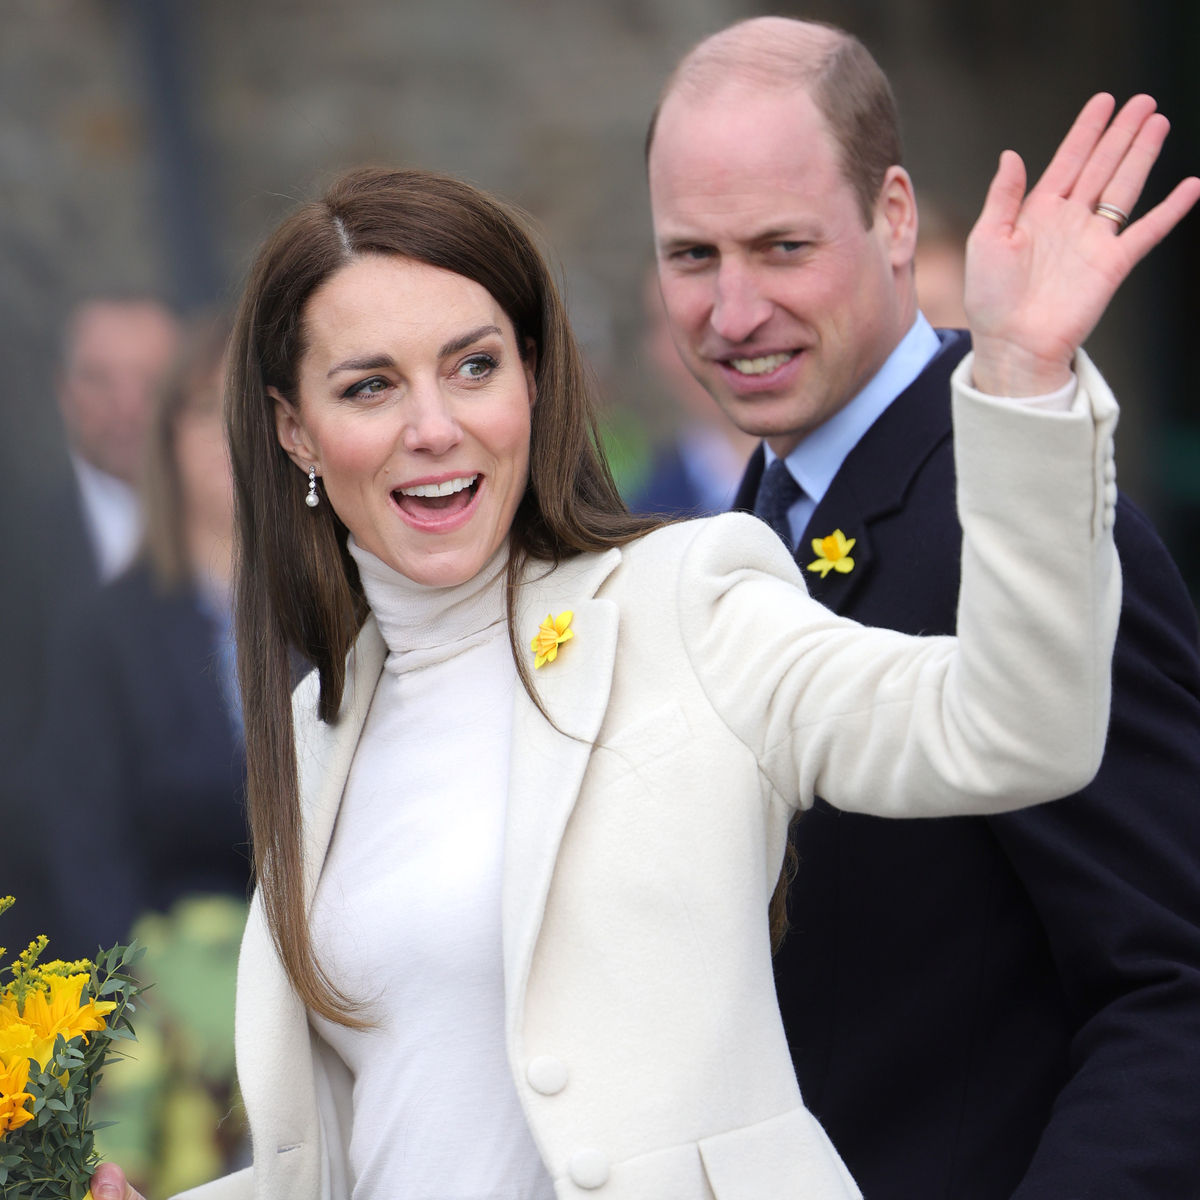 Kate Middleton and Prince William Get New Titles From King Charles III